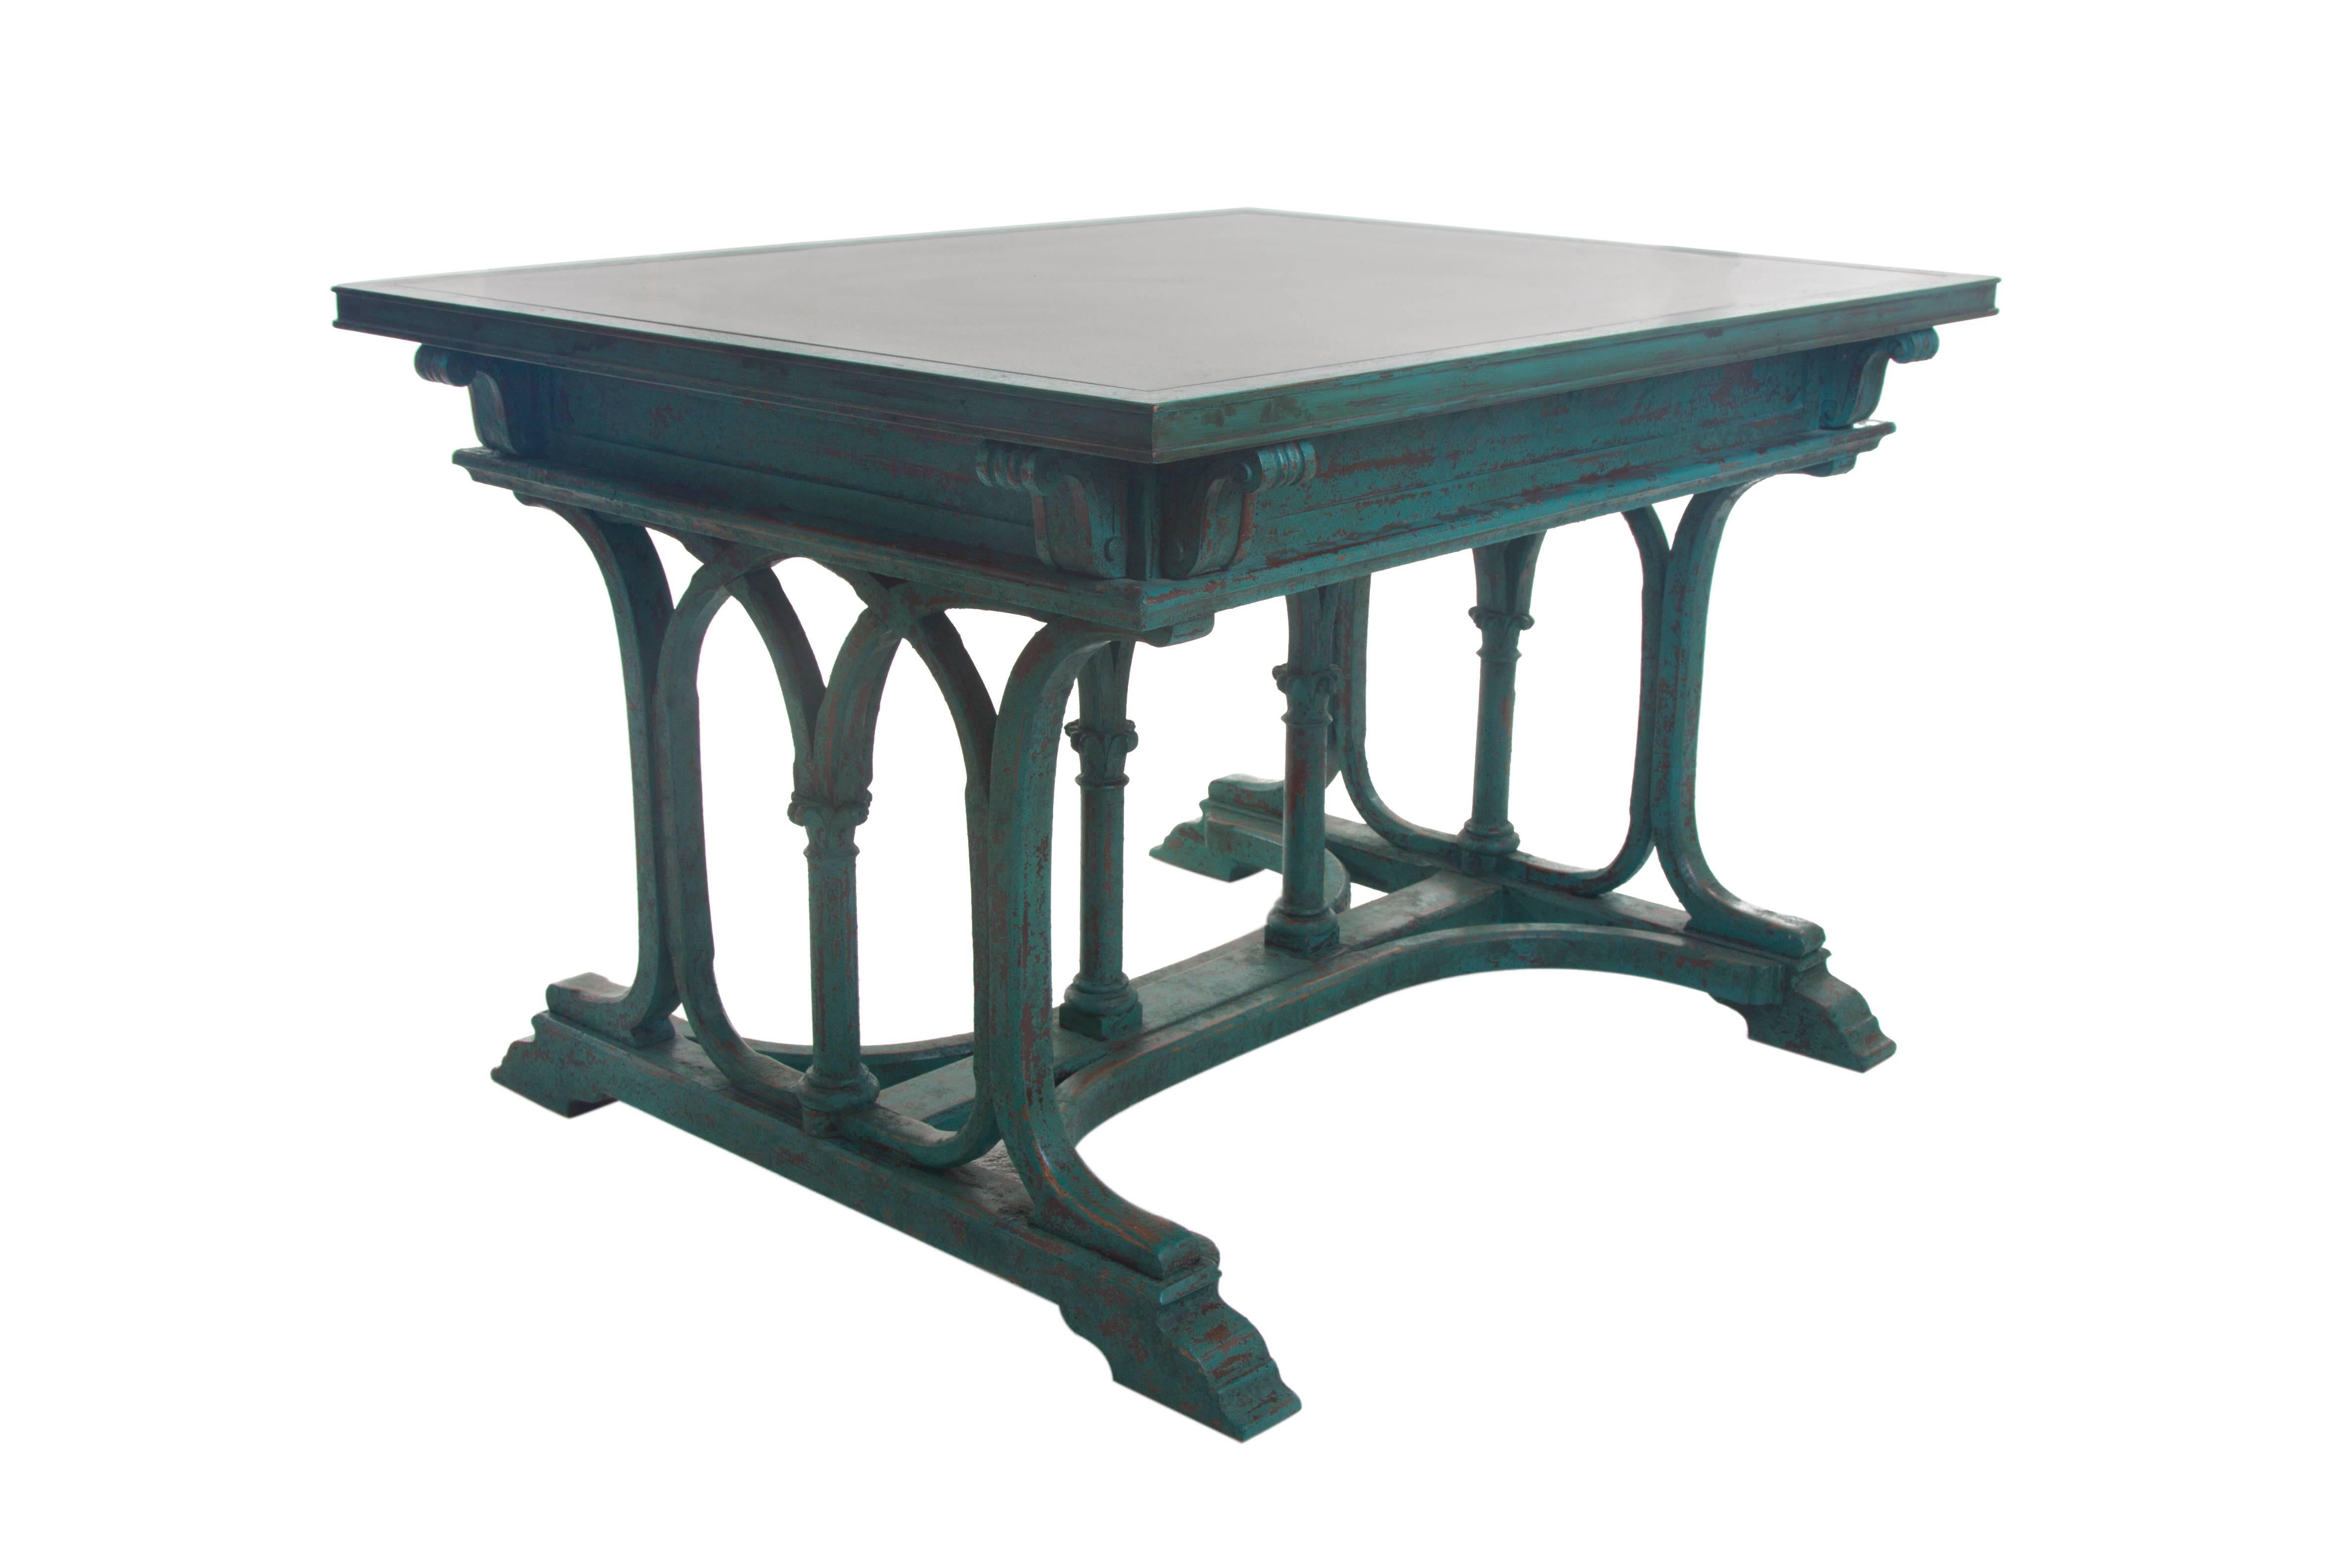  Center table by Thonet,wooden structure with countersunk granite top. Beautiful green patina finish, Austria, circa 1900. Original label to base.
Rare and Versatile table which would make a great writing table.  